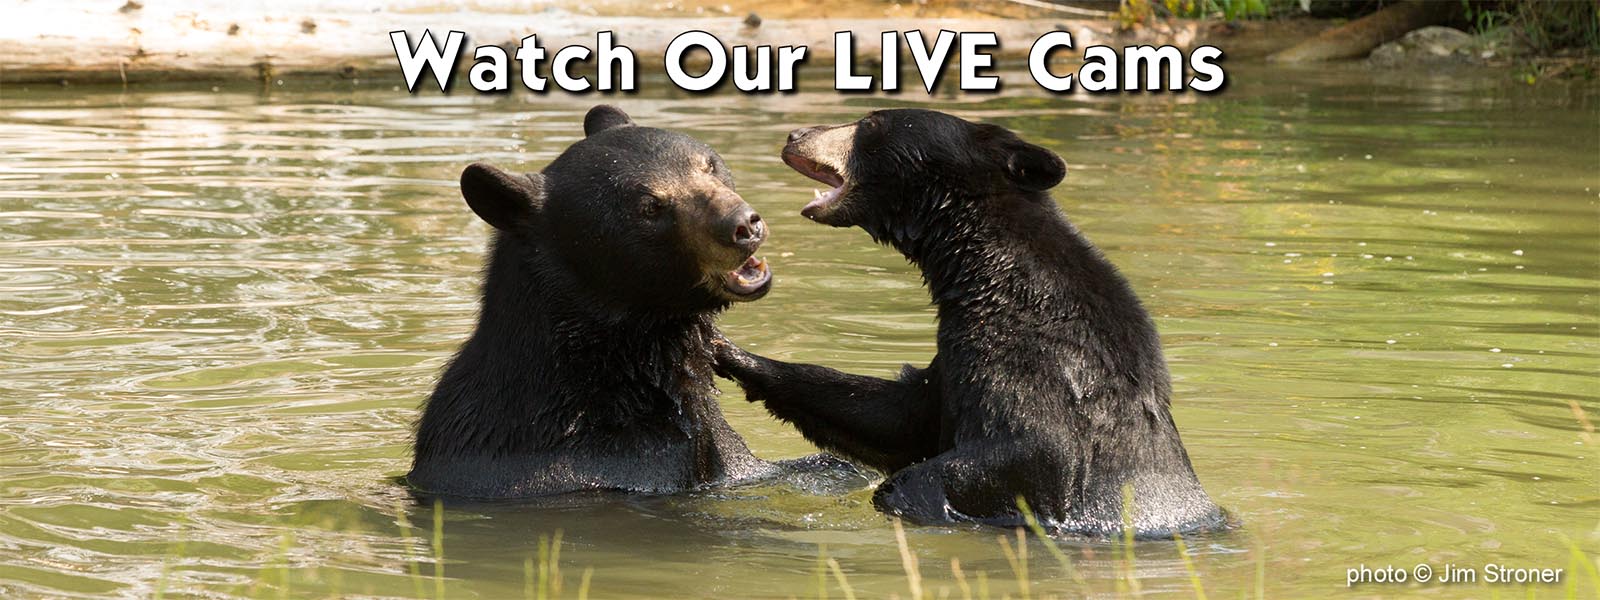 Watch our Live Cams banner